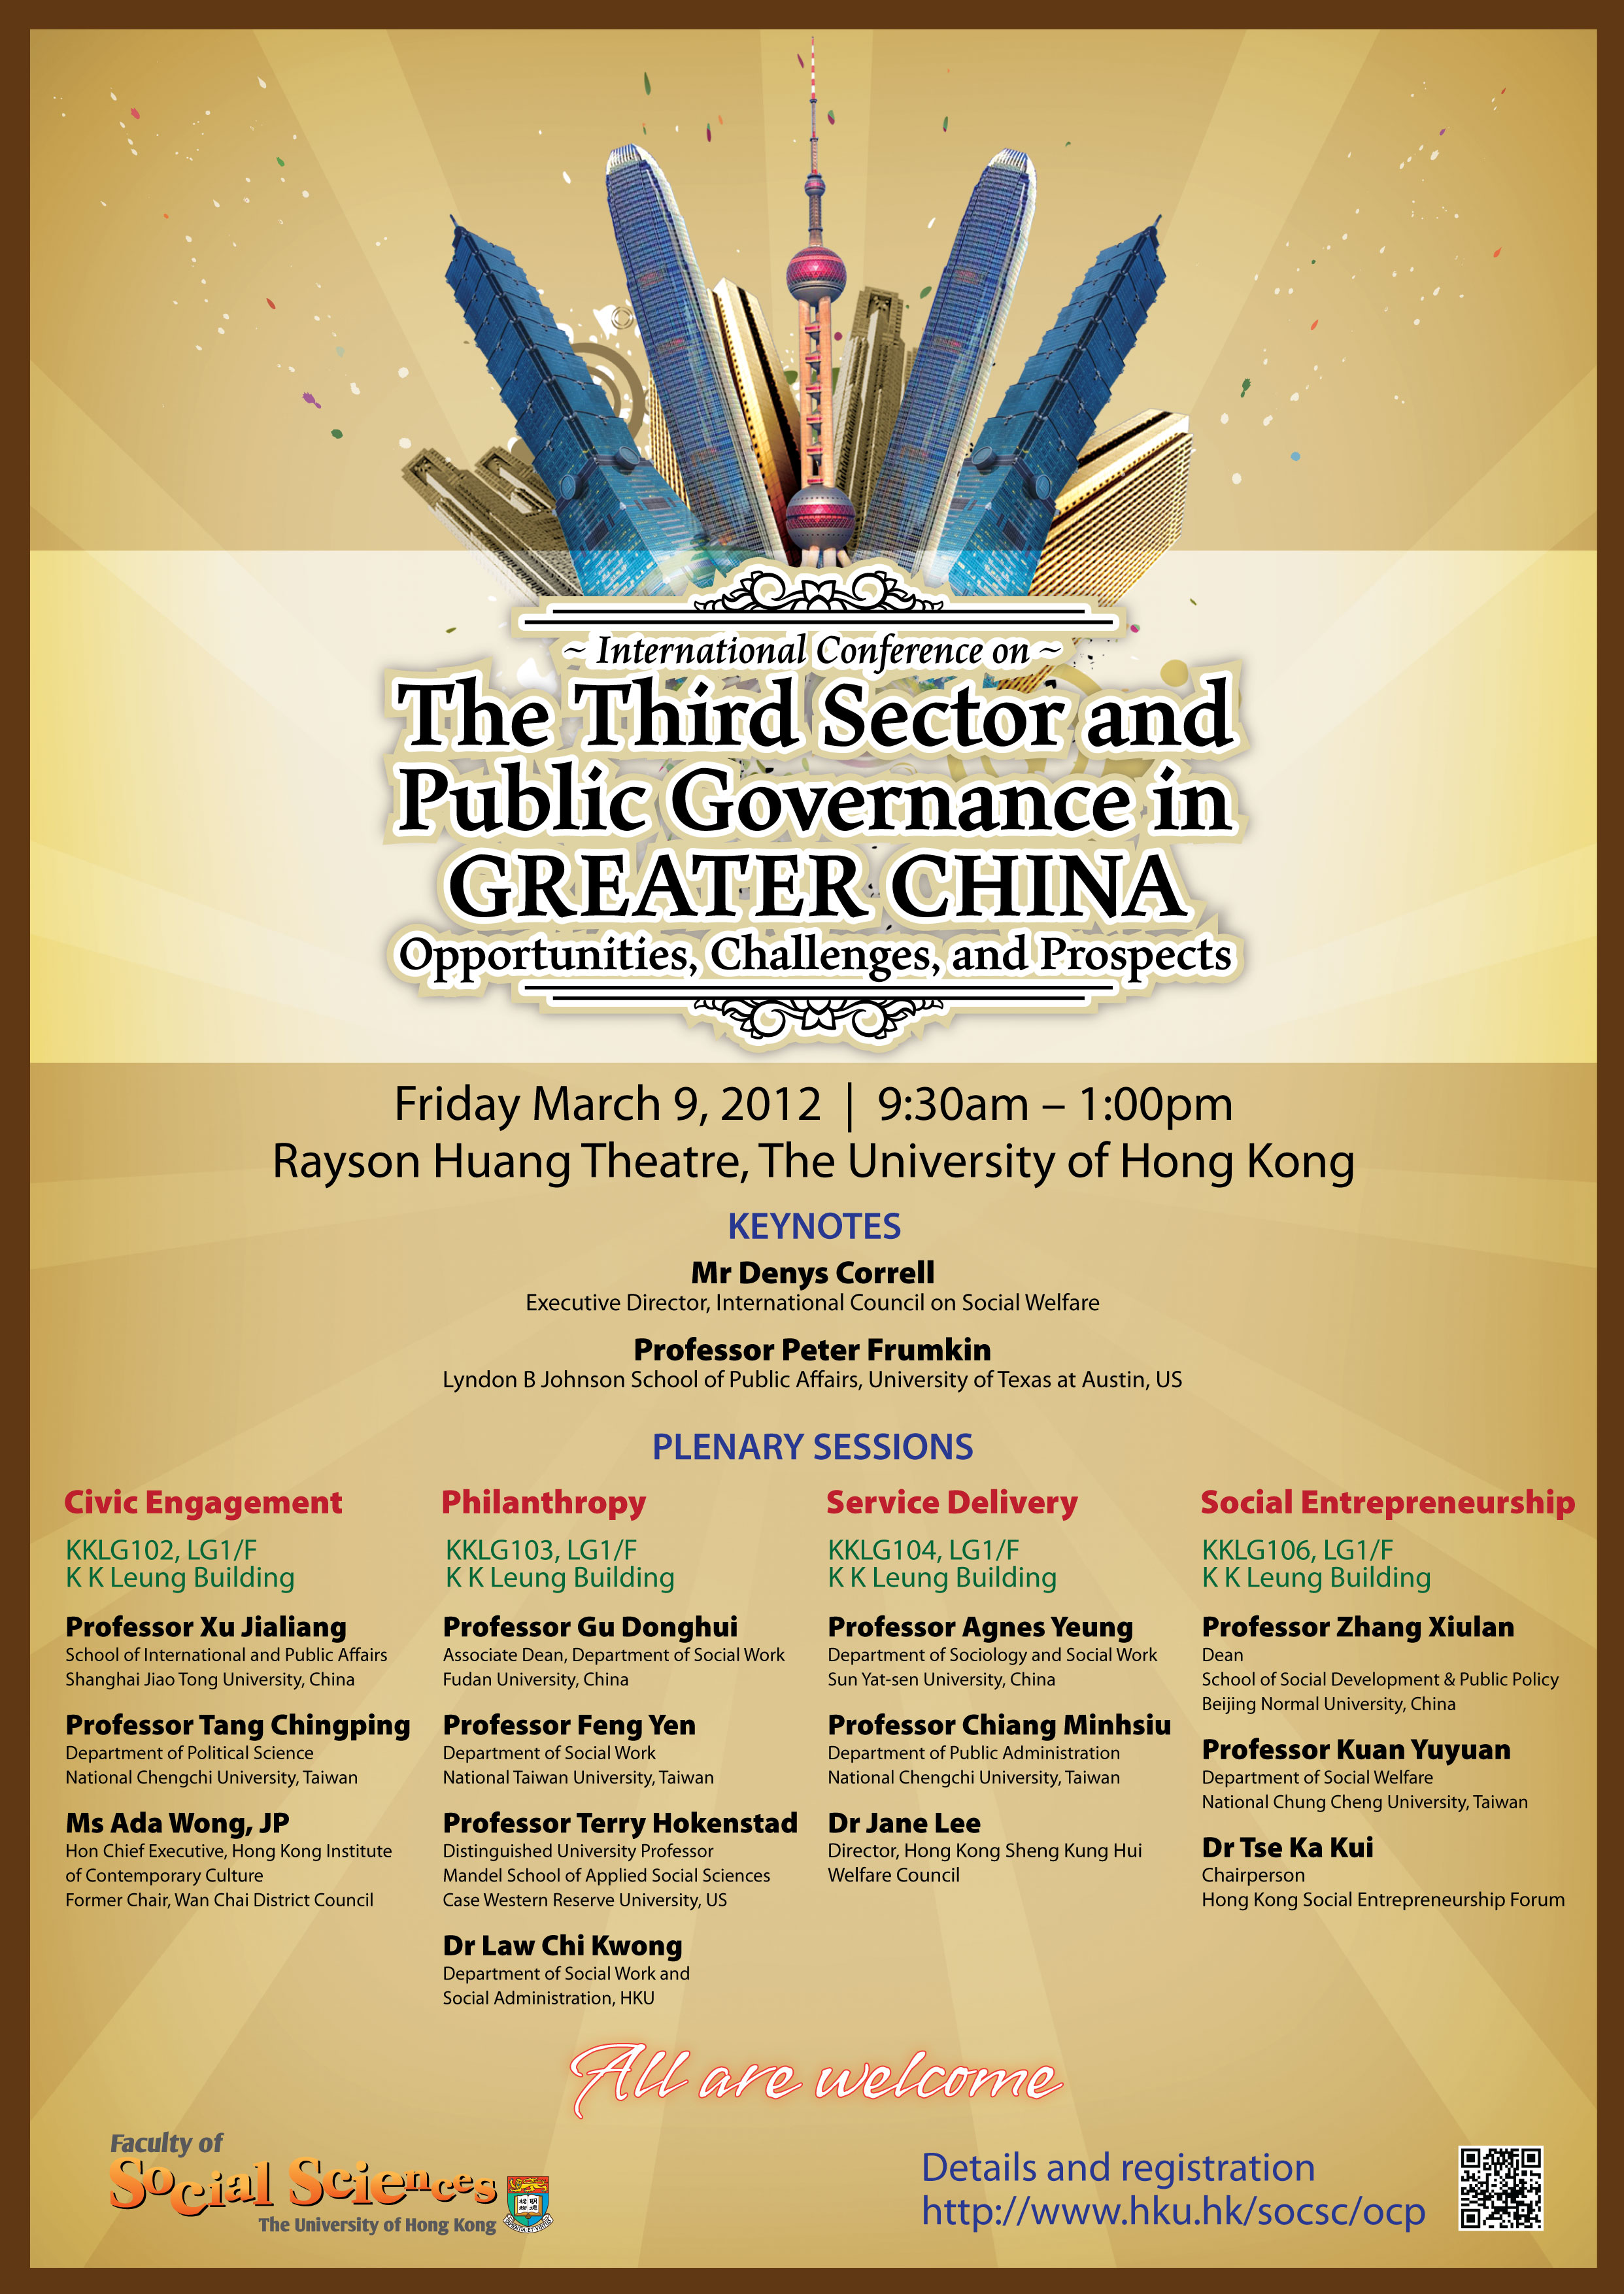 International Conference on the Third Sector and Public Governance in Greater China